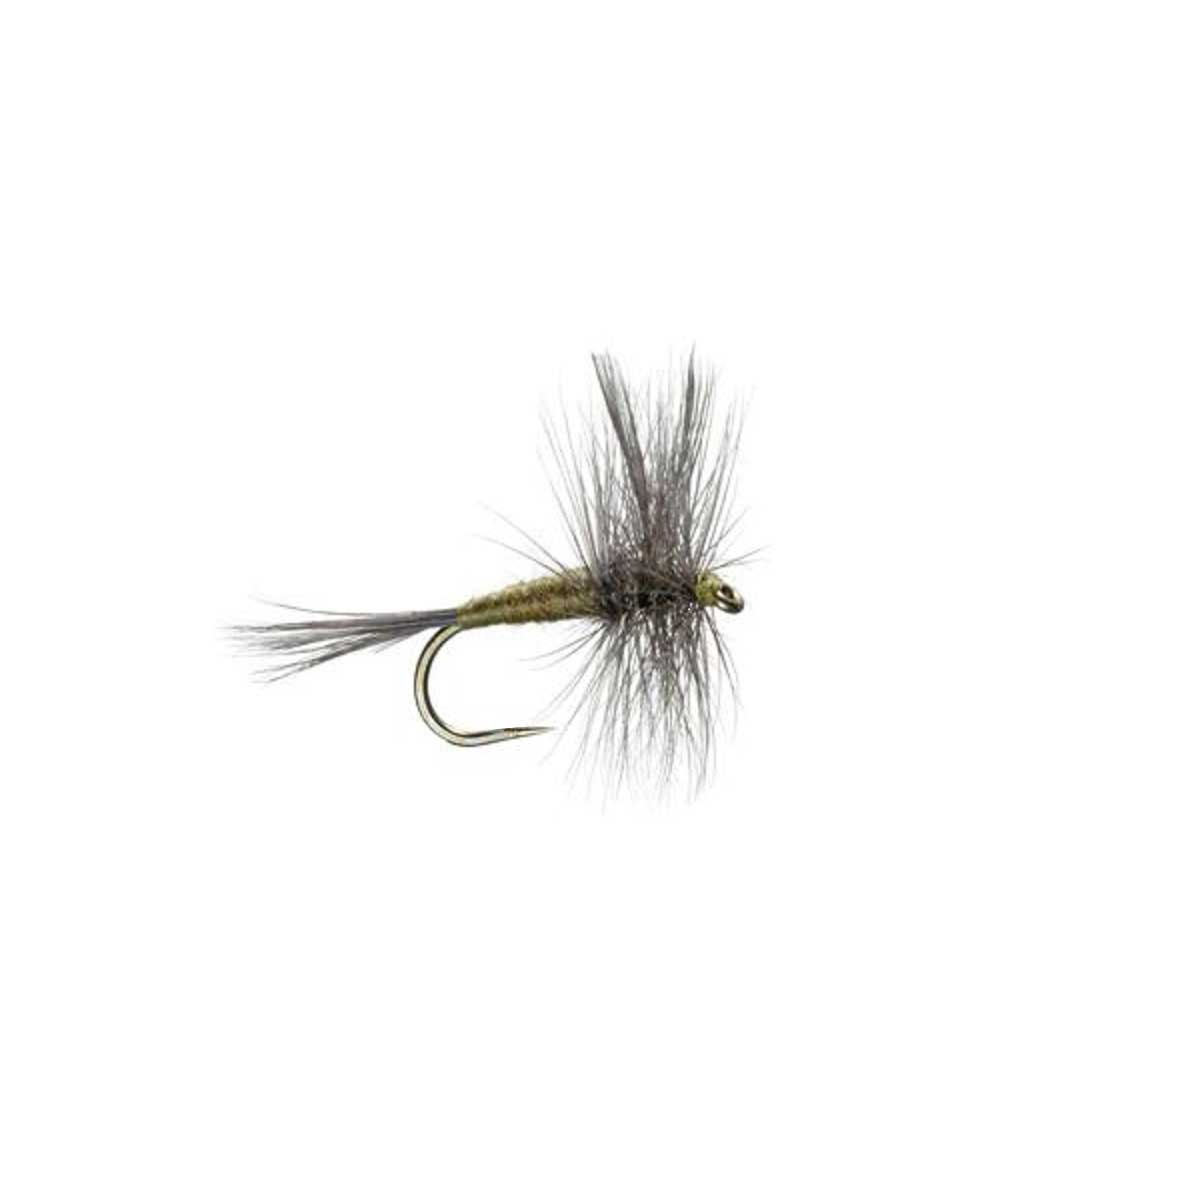 Blue Upright Winged Dry Fly from the guys at fish fishing flies